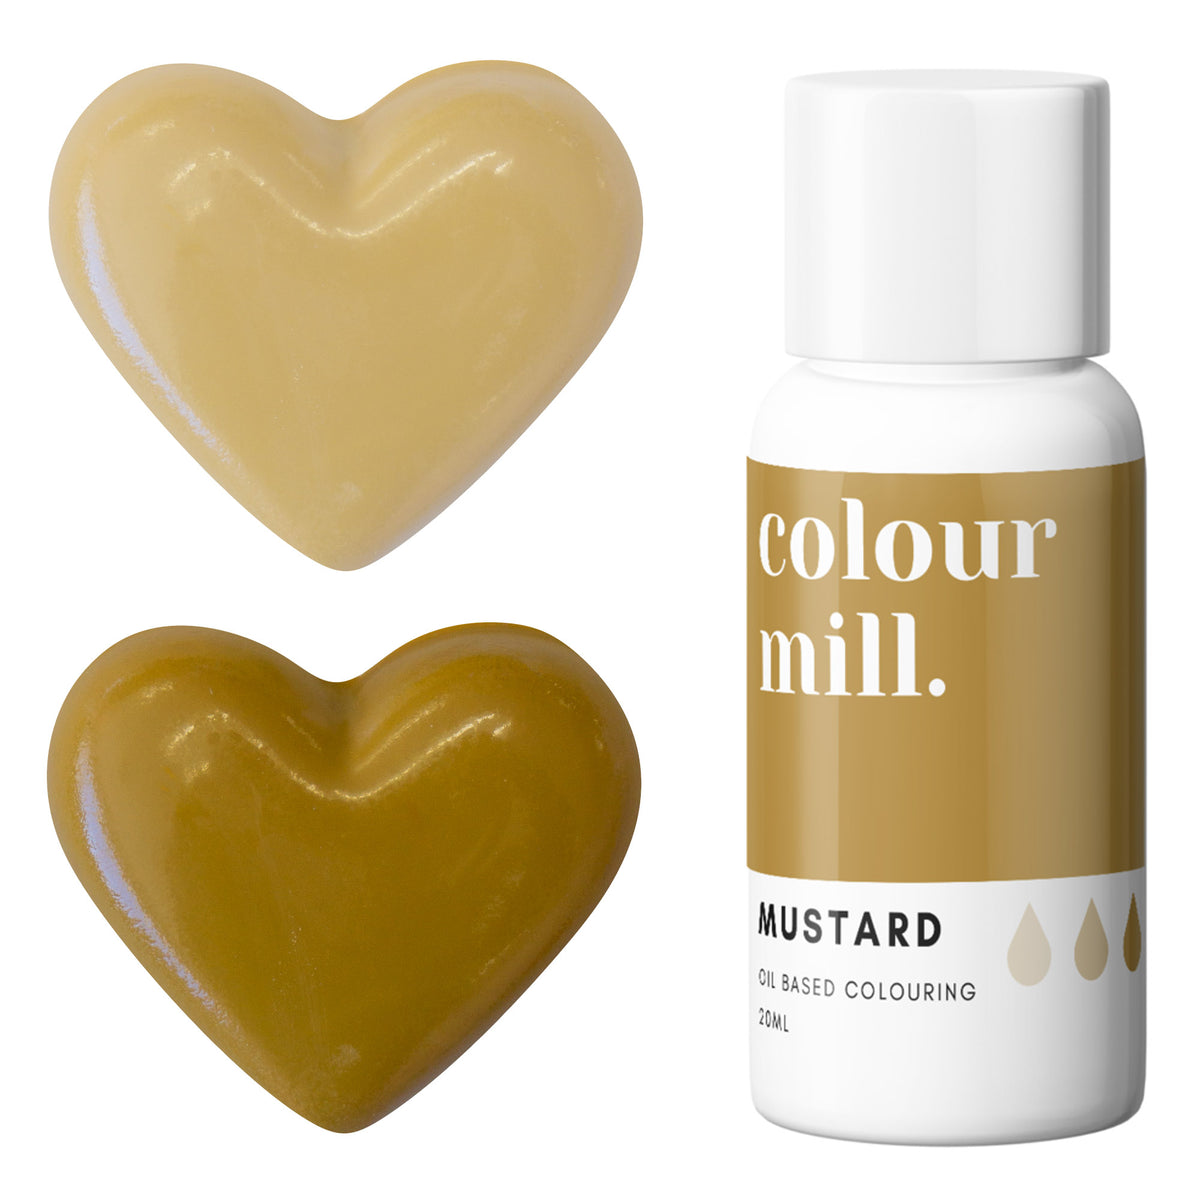 Mustard Colour Mill Oil Based Food Coloring